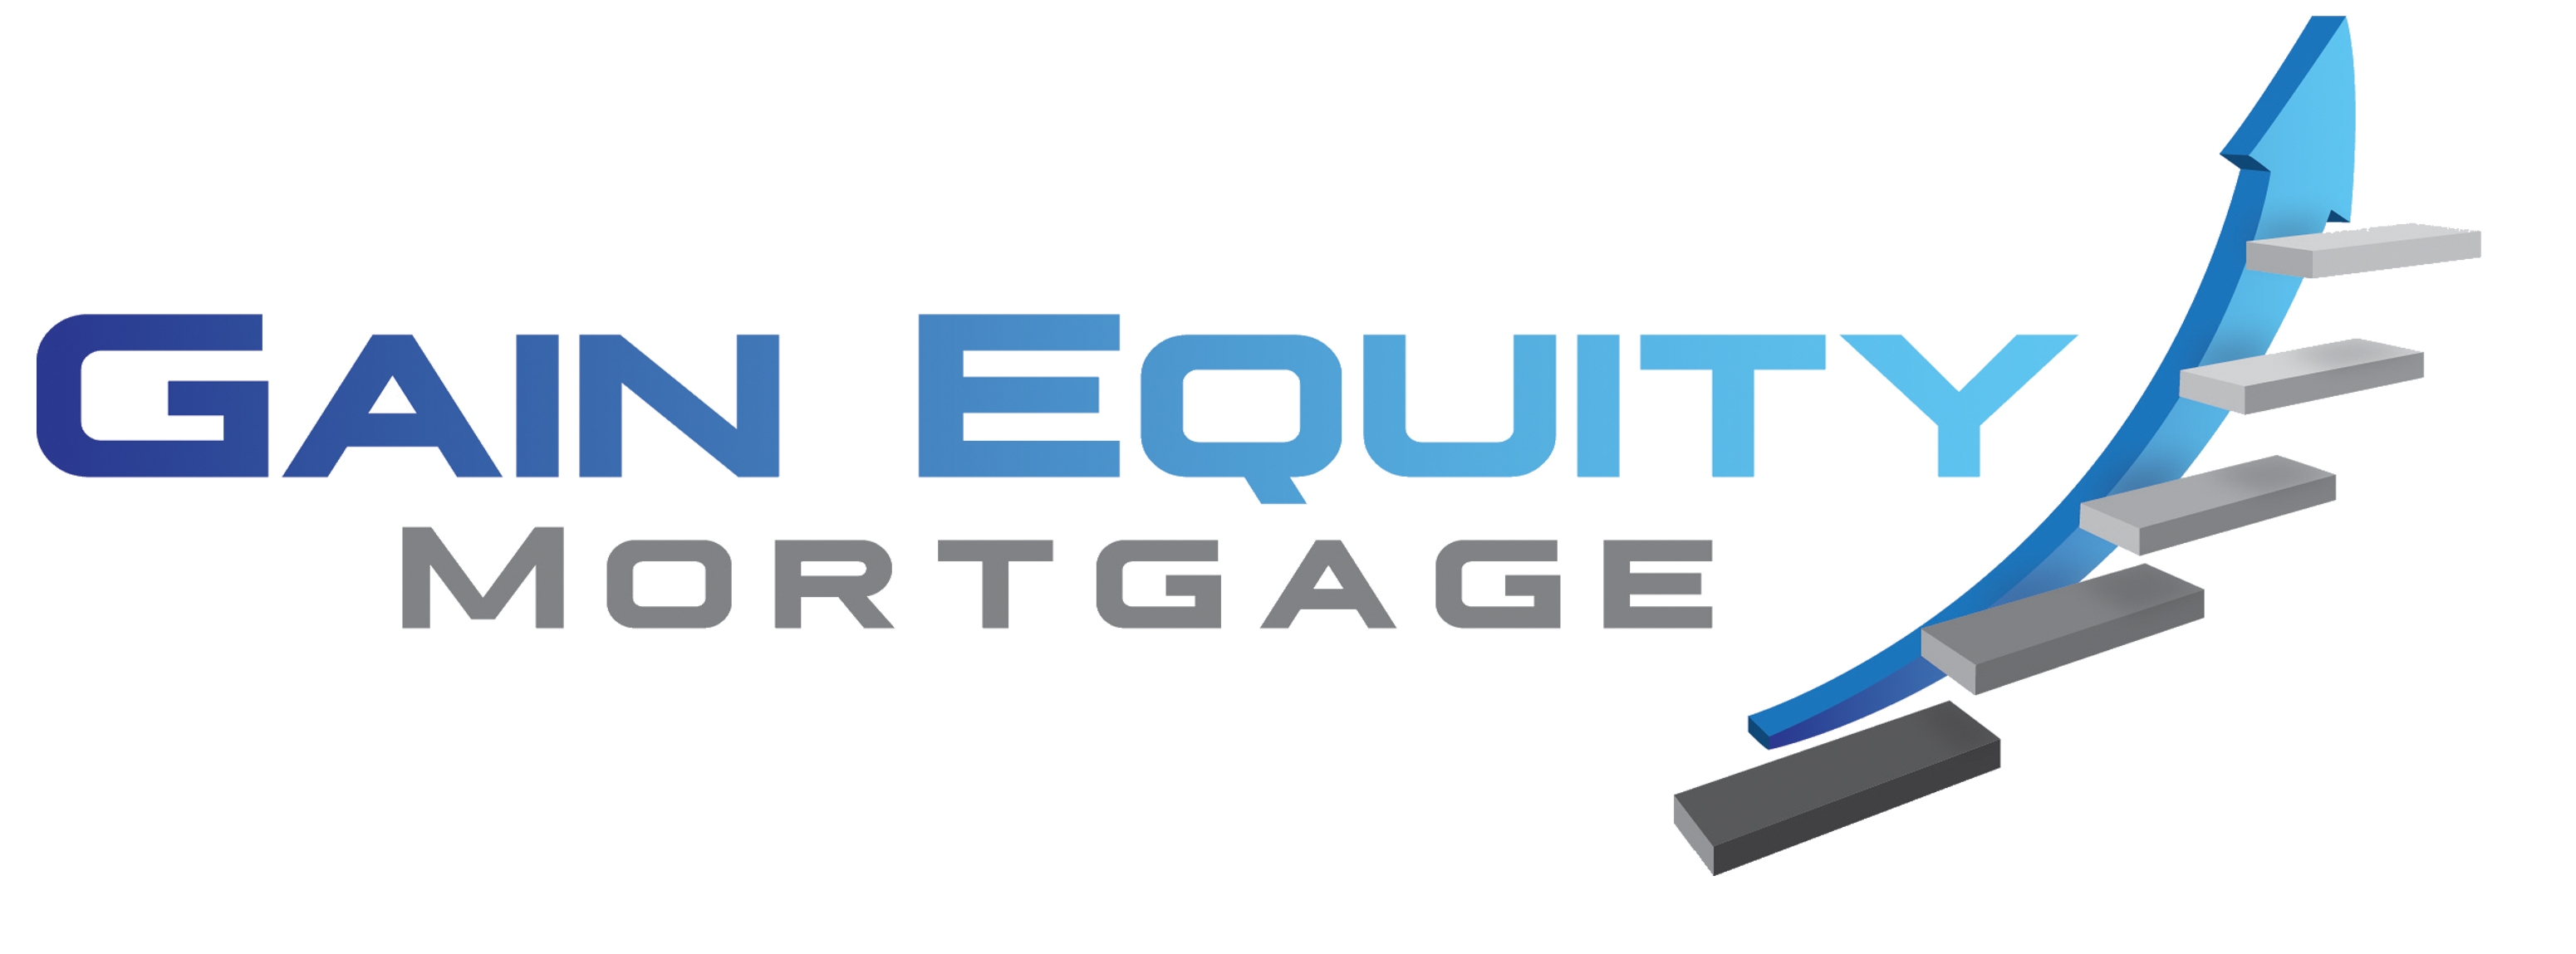 Gain Equity Mortgage